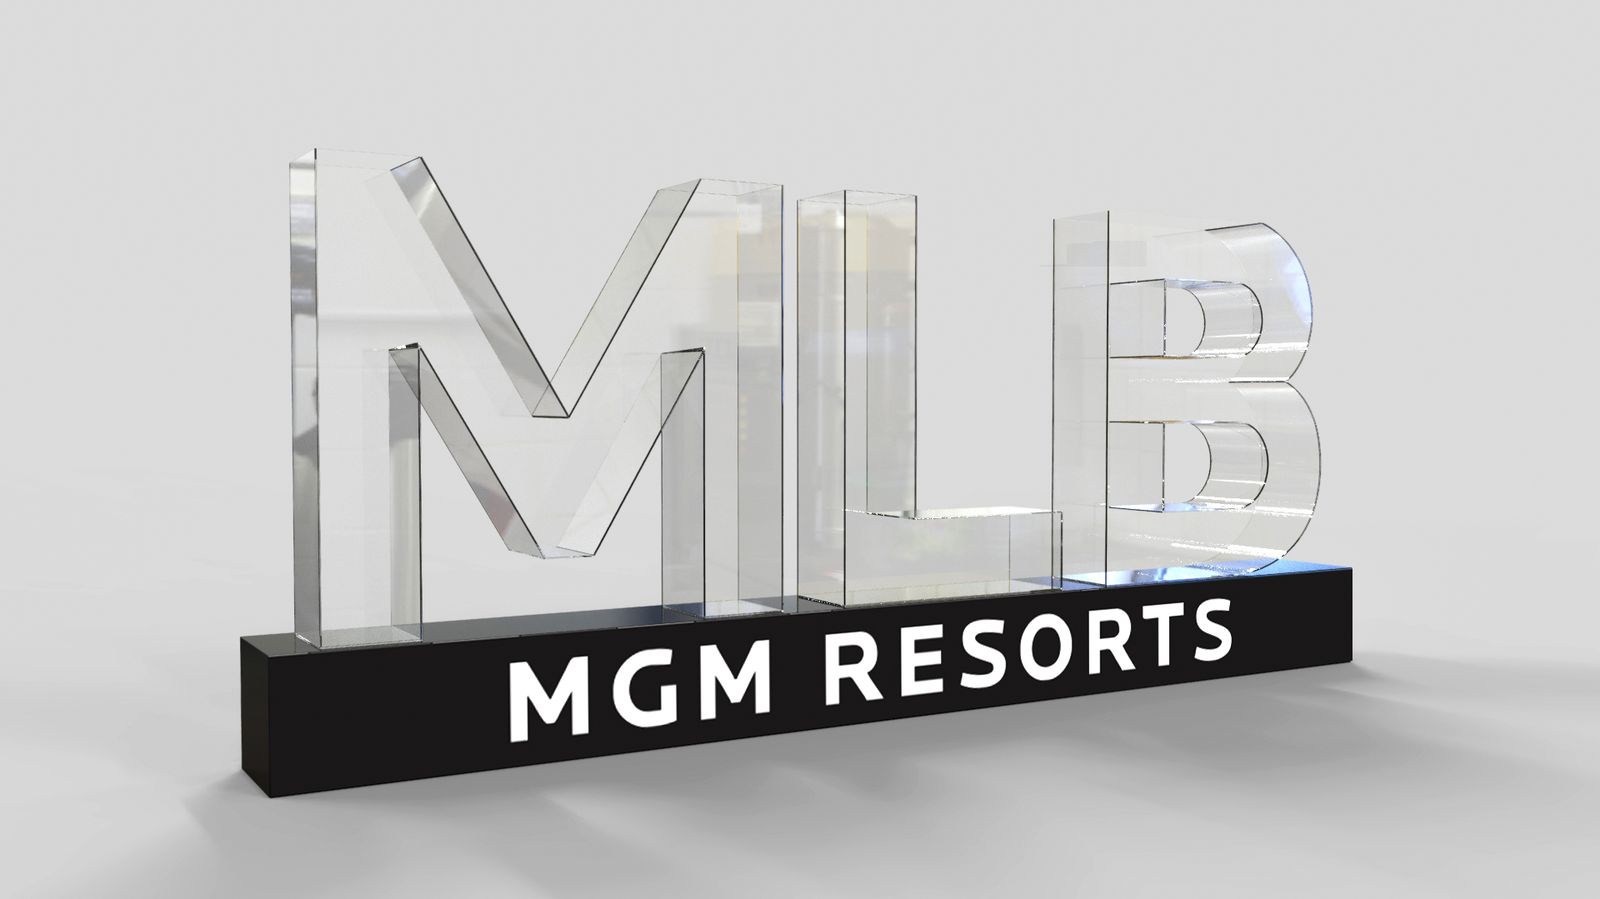 mgm resorts mlb 3d letters rendering